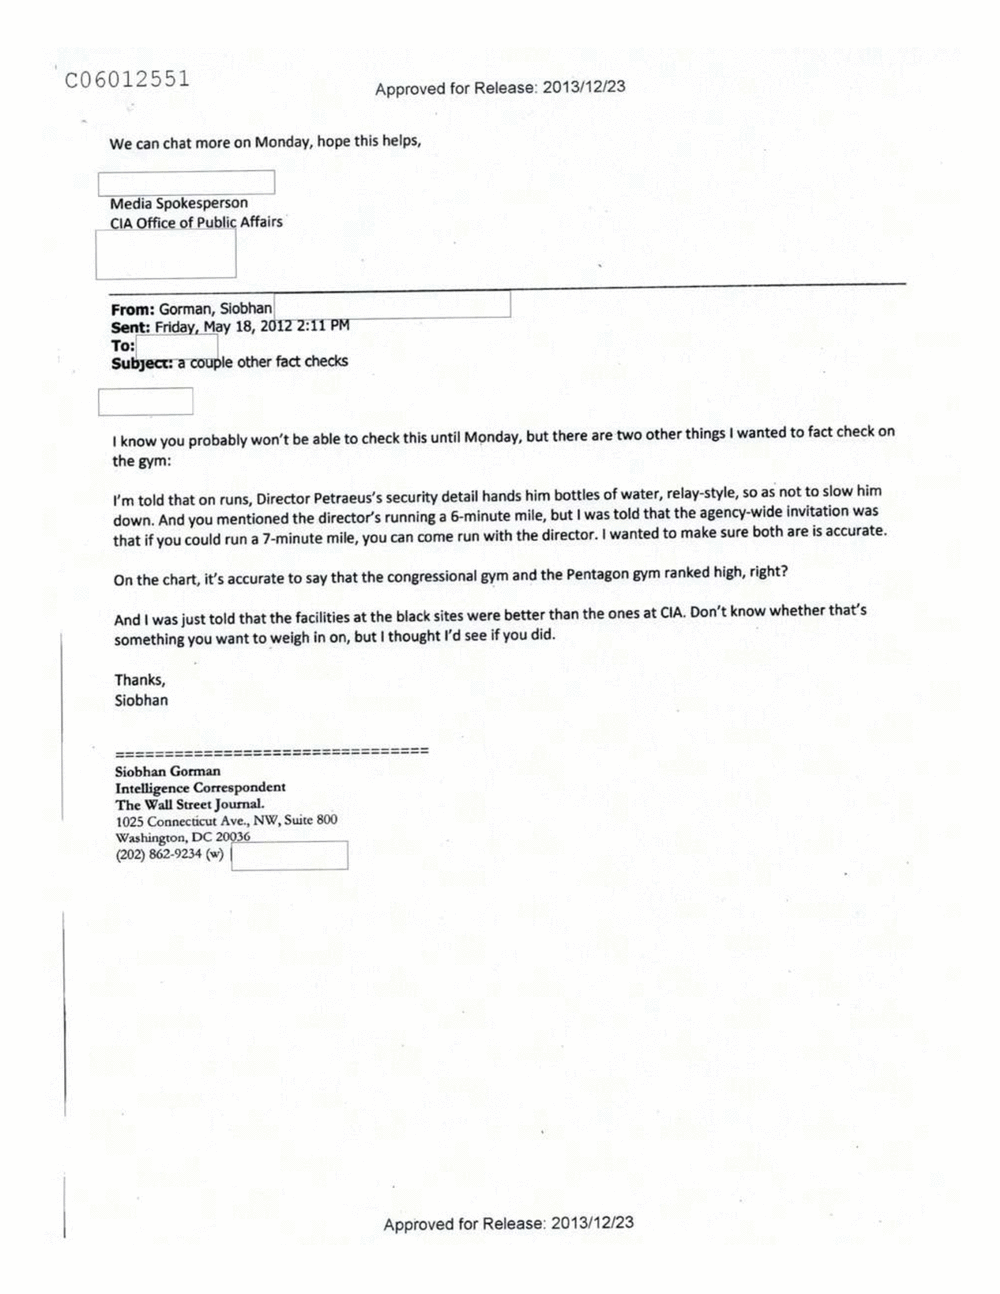 Page 88 from Email Correspondence Between Reporters and CIA Flacks